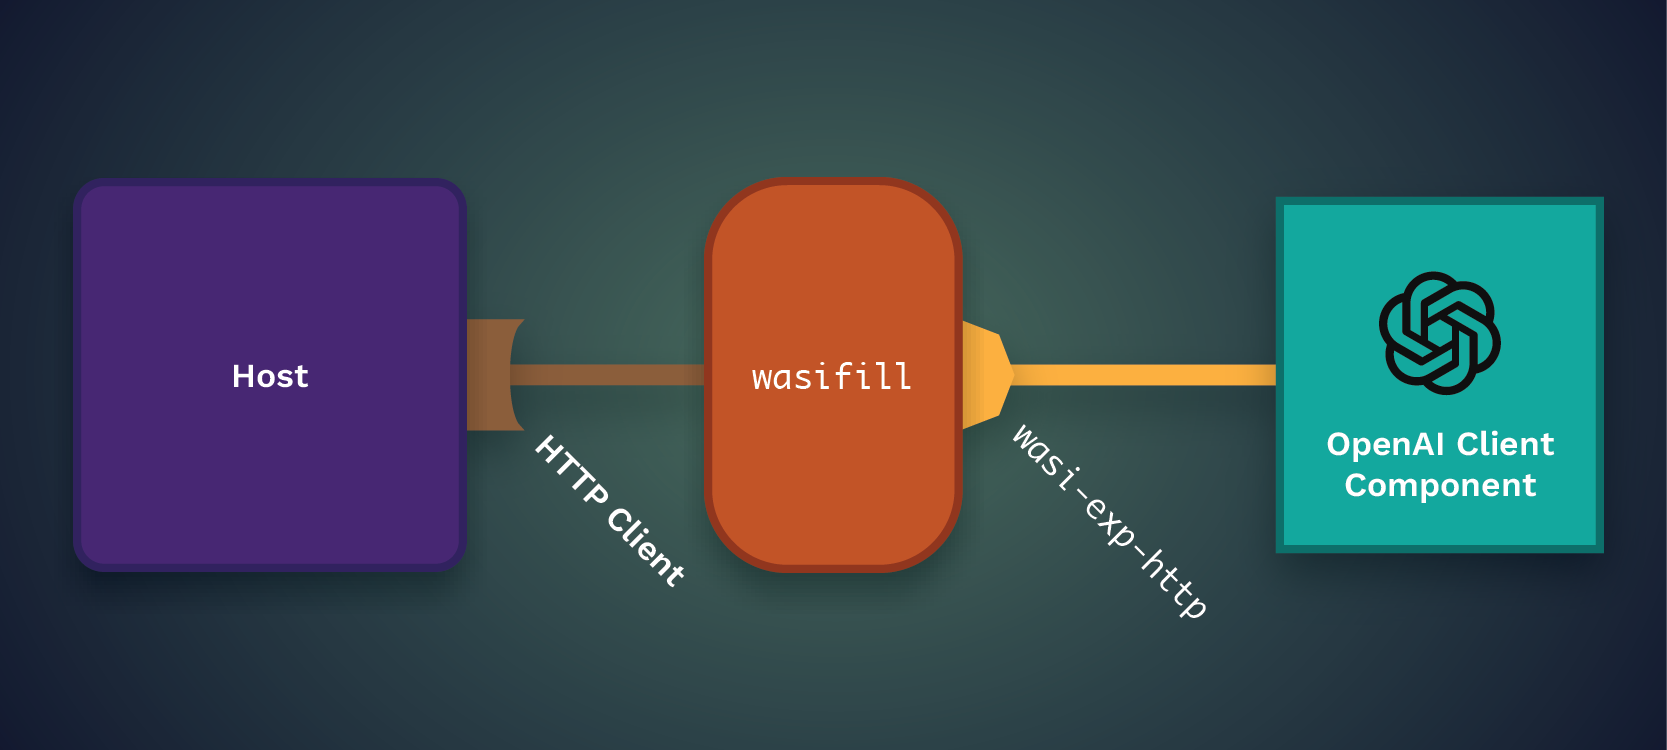 Diagram of an OpenAI Client component connecting to a Host through a wasifill using the WASI experimental HTTP contract